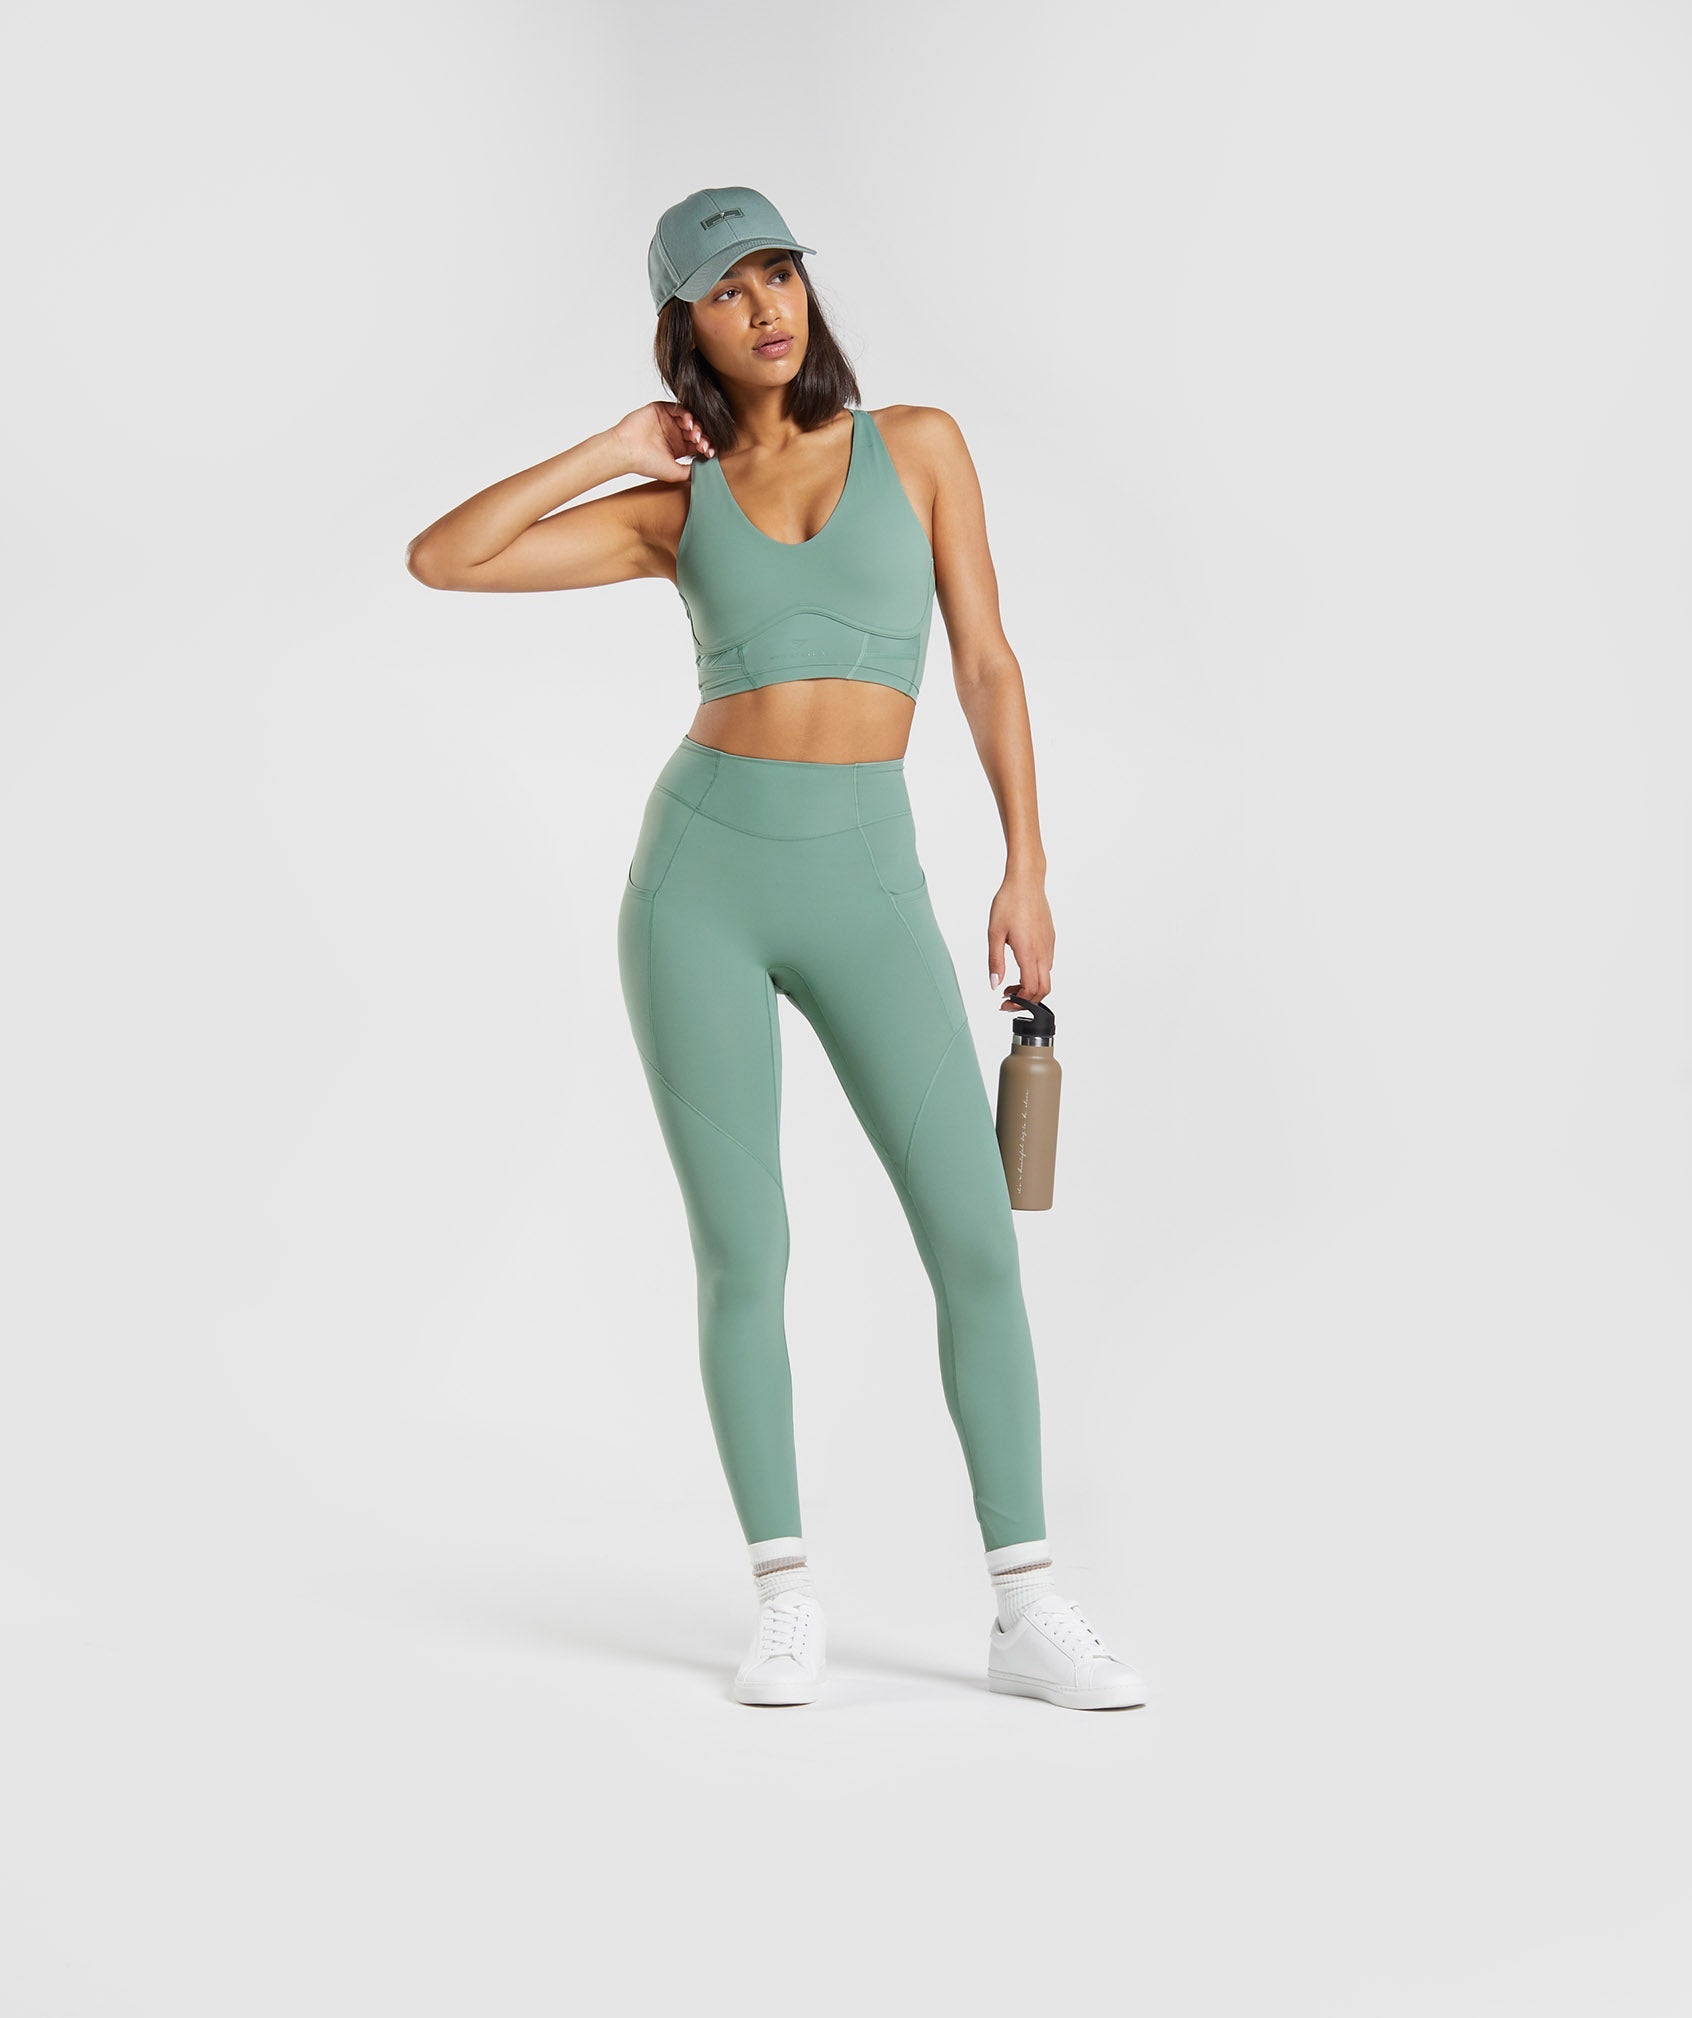 Gymshark launches new clothing collection with its athlete Whitney